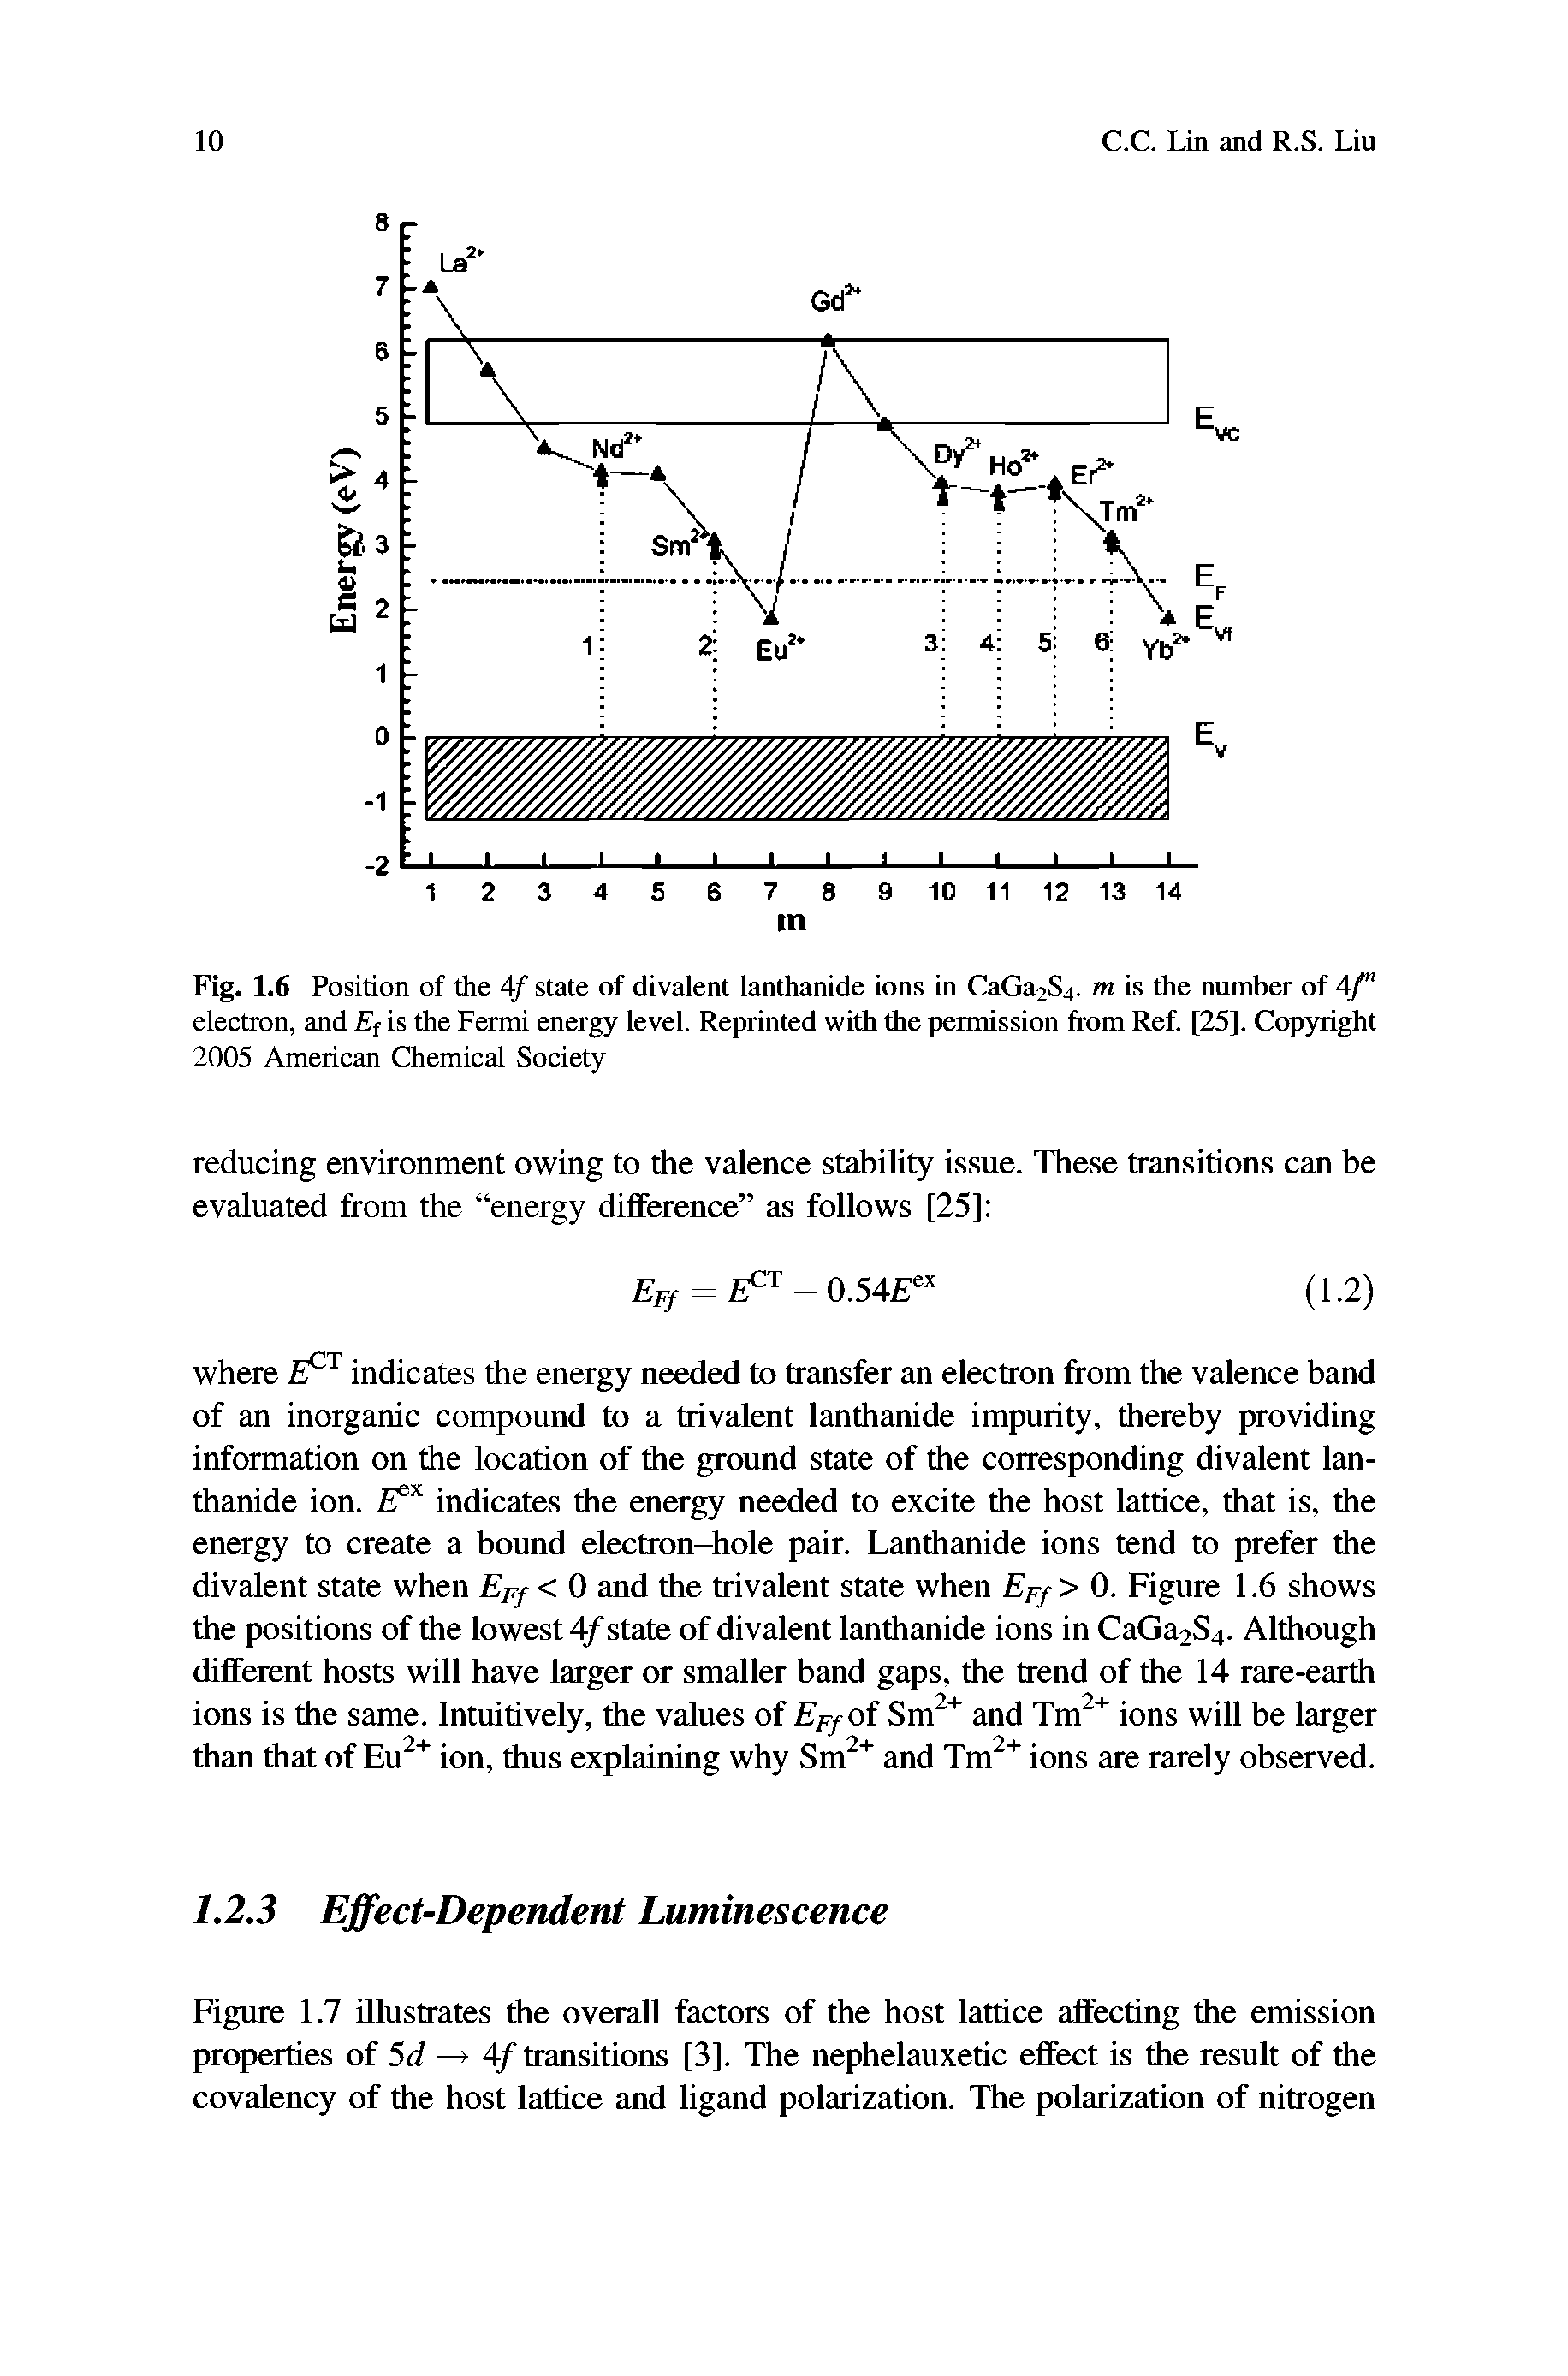 Fig. 1.6 Position of the 4f state of divalent lanthanide ions in CaGa2S4. m is the numbca- of 4f" electron, and E is the Fermi energy level. Reprinted with the permission from Ref. [25]. Copyright 2005 American Chemical Society...